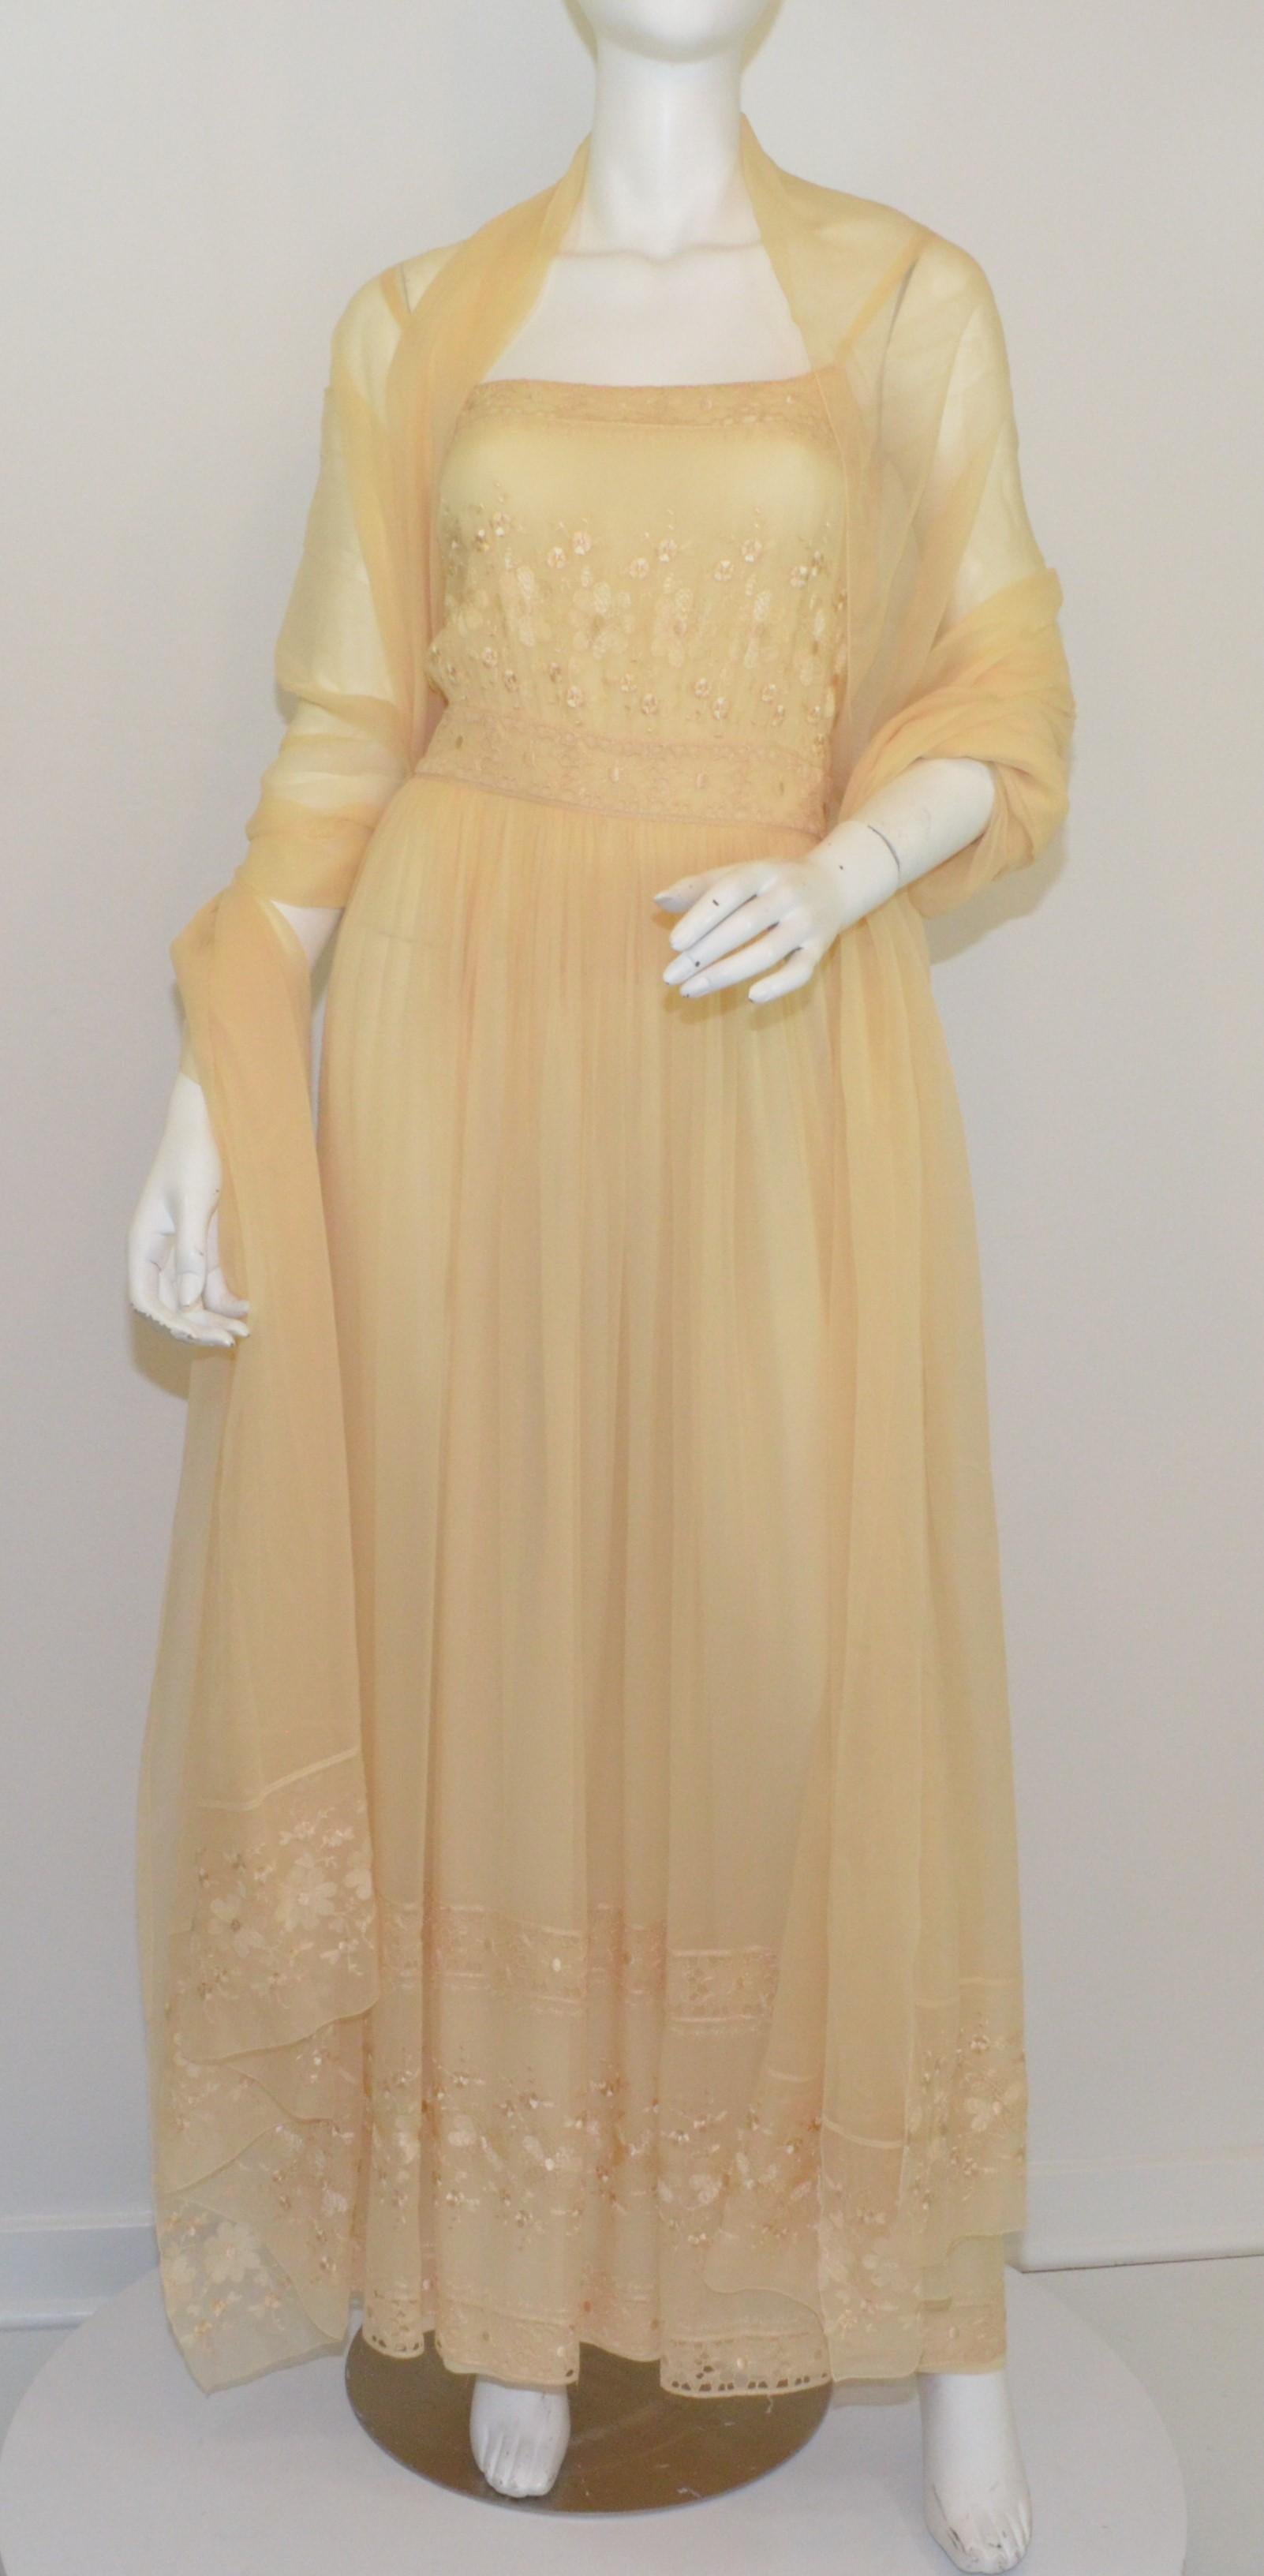 This beautiful Christian Dior boutique gown is featured in a beige color composed with silk chiffon with a floral eyelet detail along the bodice and side panels. Dress has flat shoulder straps and a side zipper fastening. Dress is fully lined and